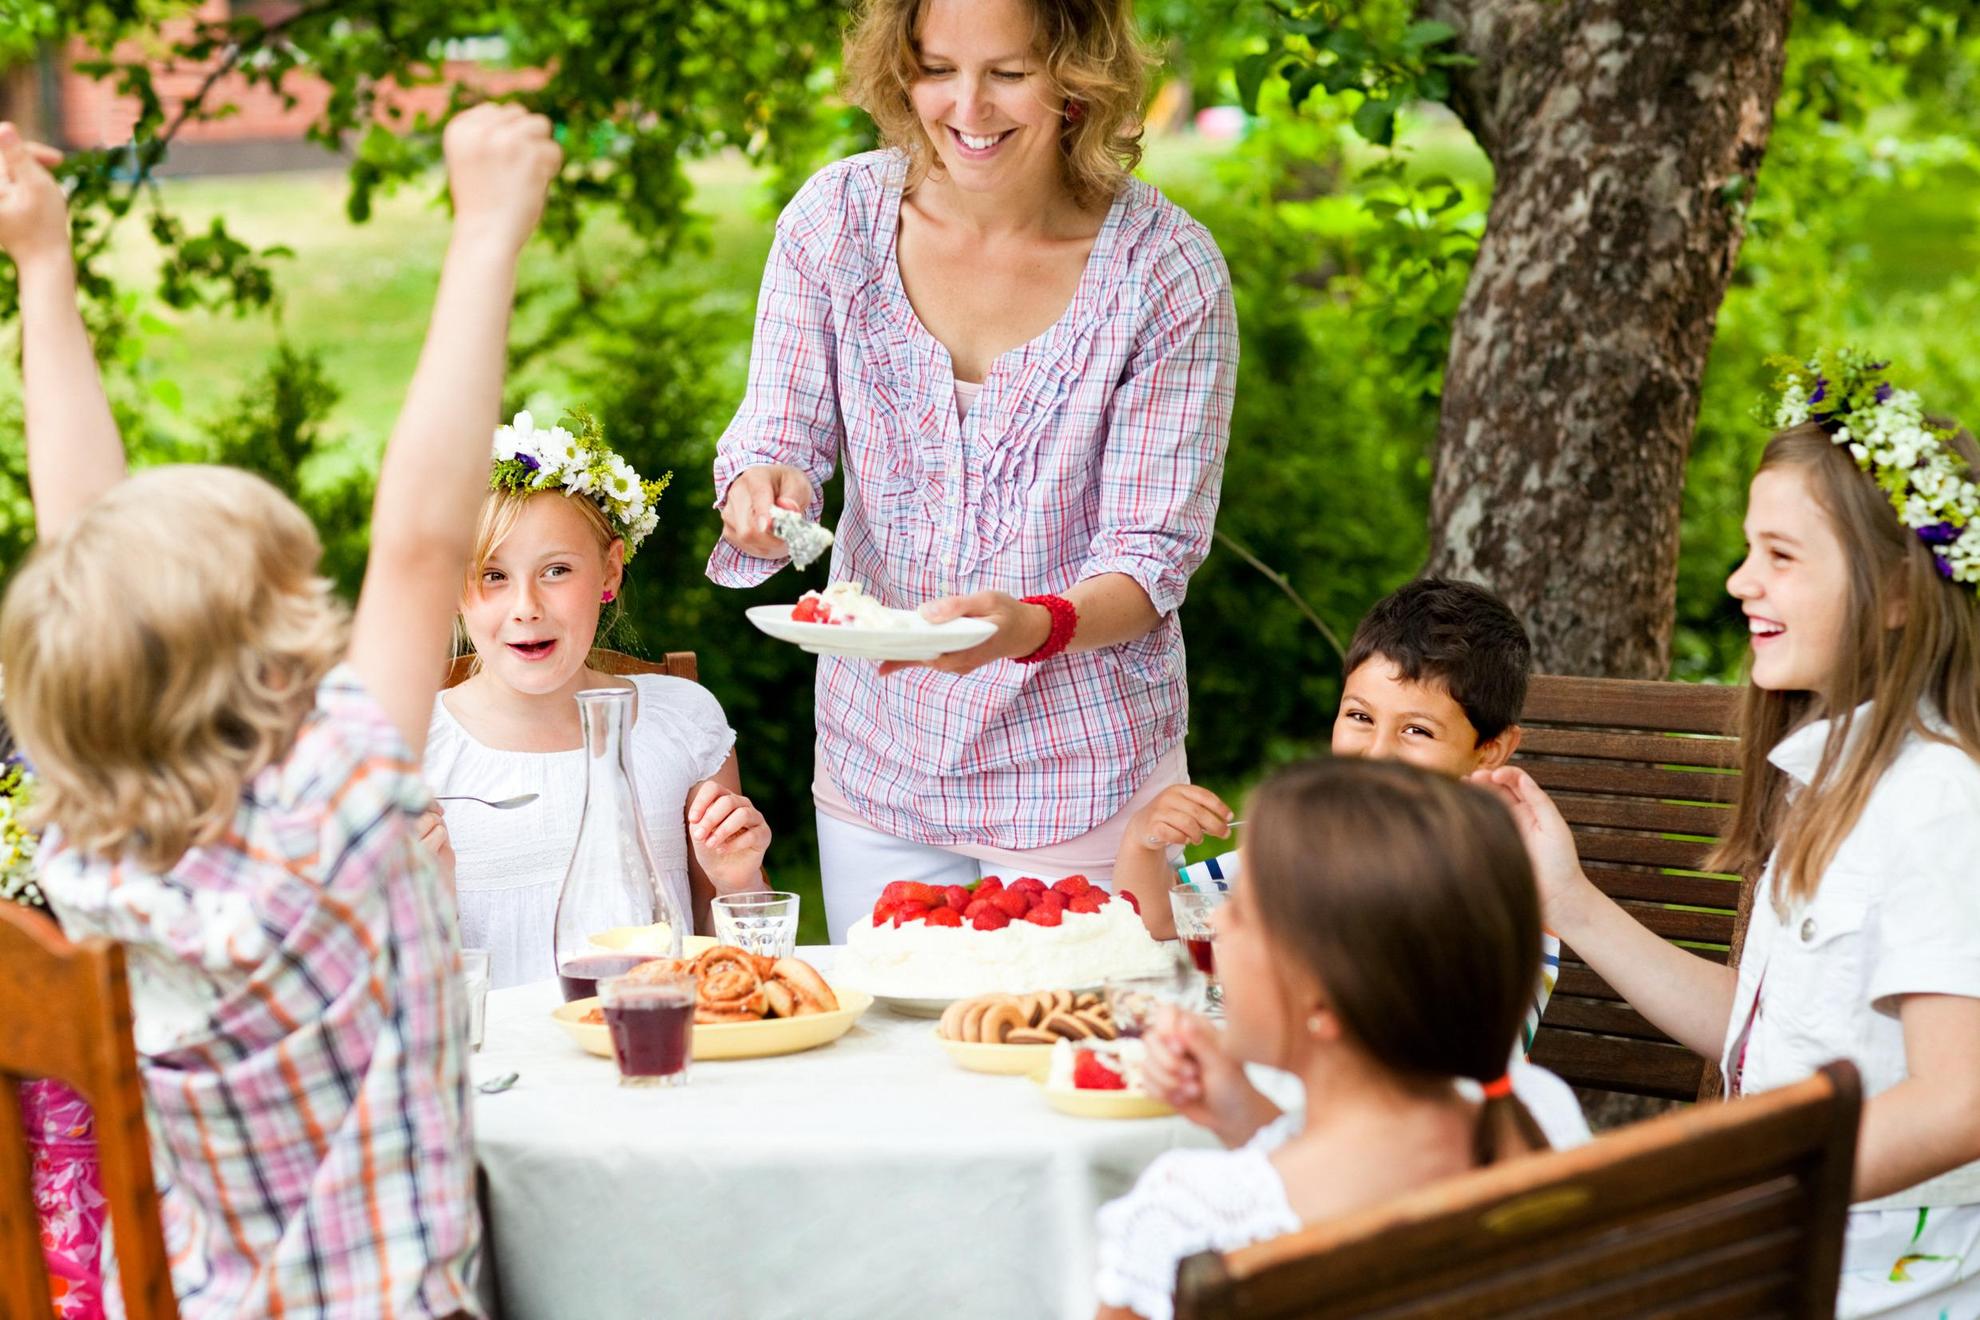 A woman is serving strawberry cake to some children sitting at an outside table. Some of the kids have Midsummer flower wreaths in their hair.